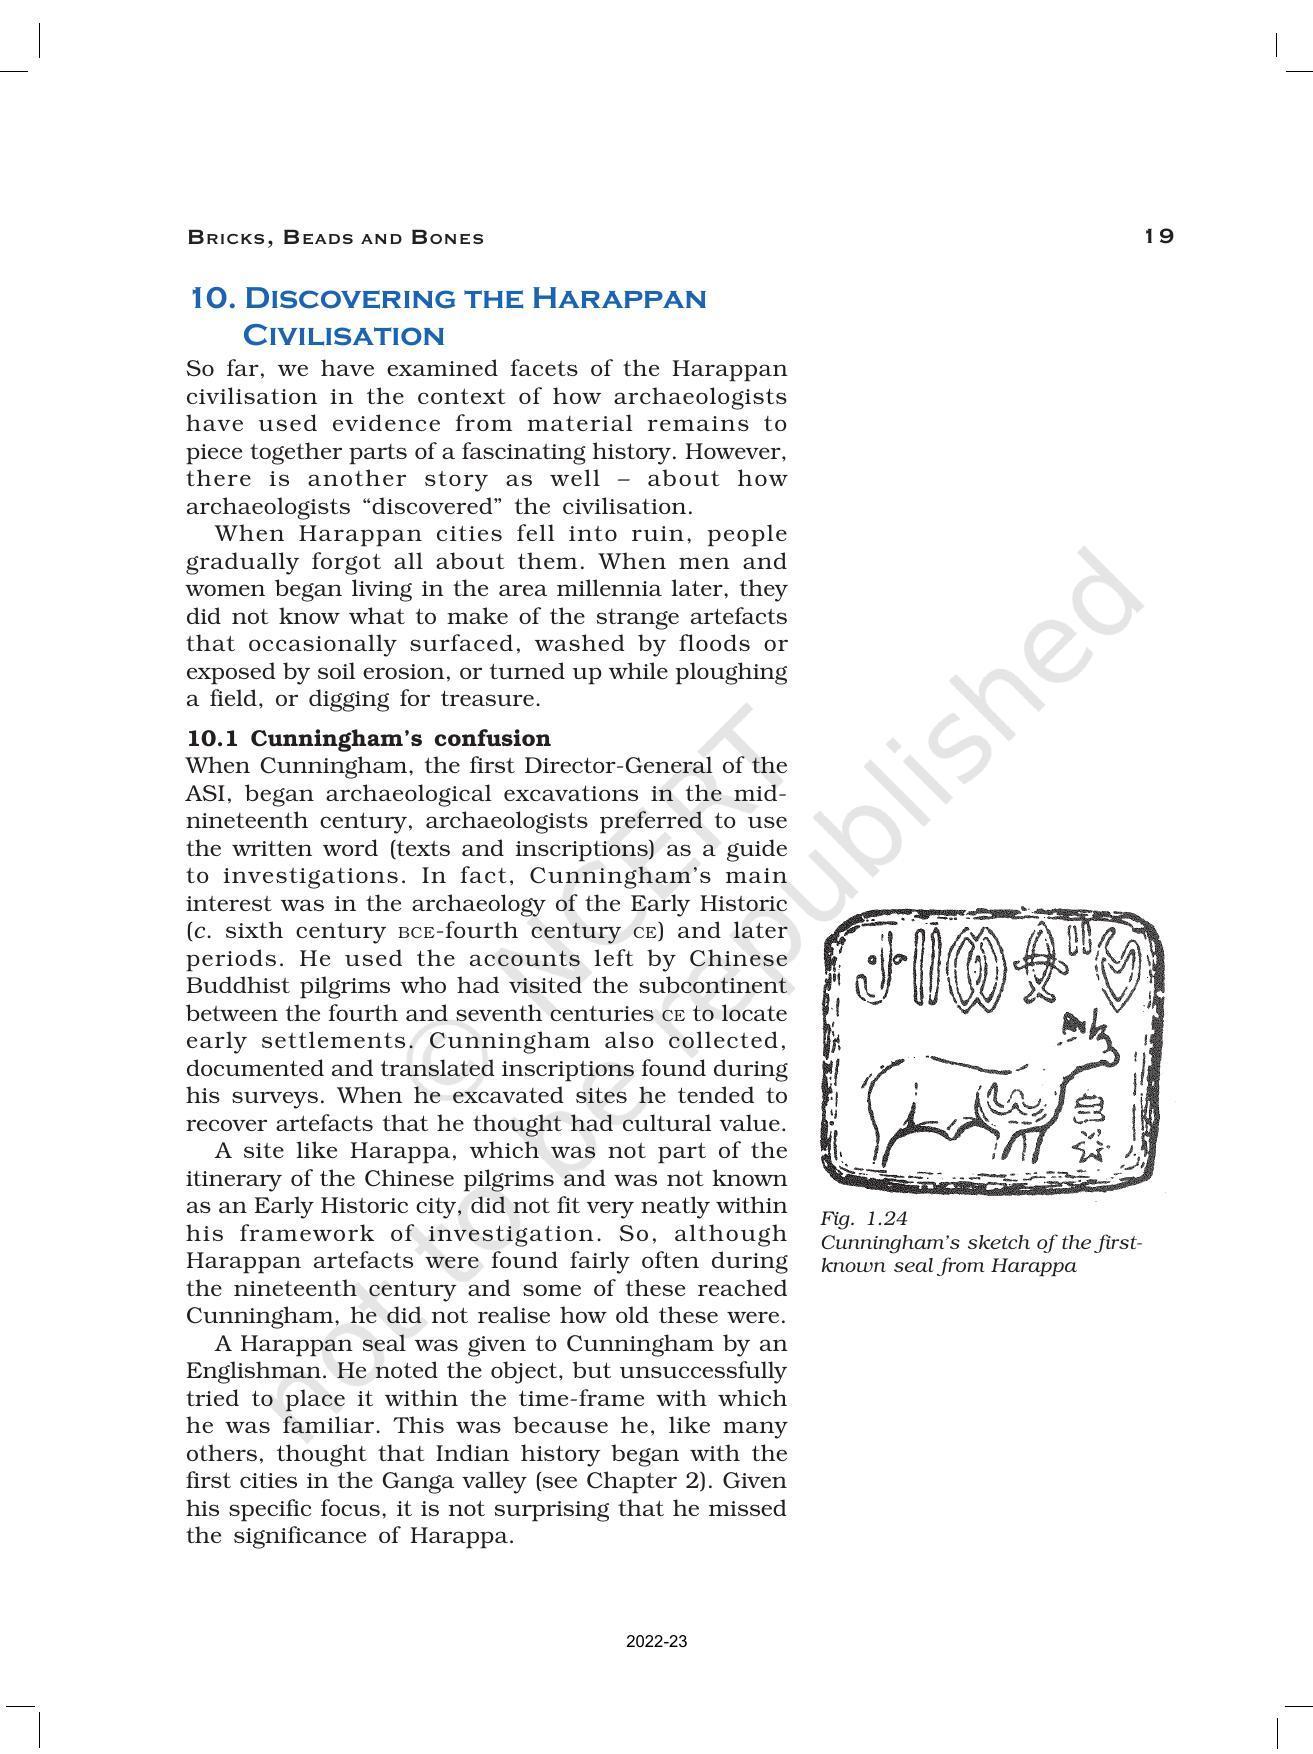 NCERT Book for Class 12 History (Part-1) Chapter 1 Bricks, Beads, and Bones - Page 19